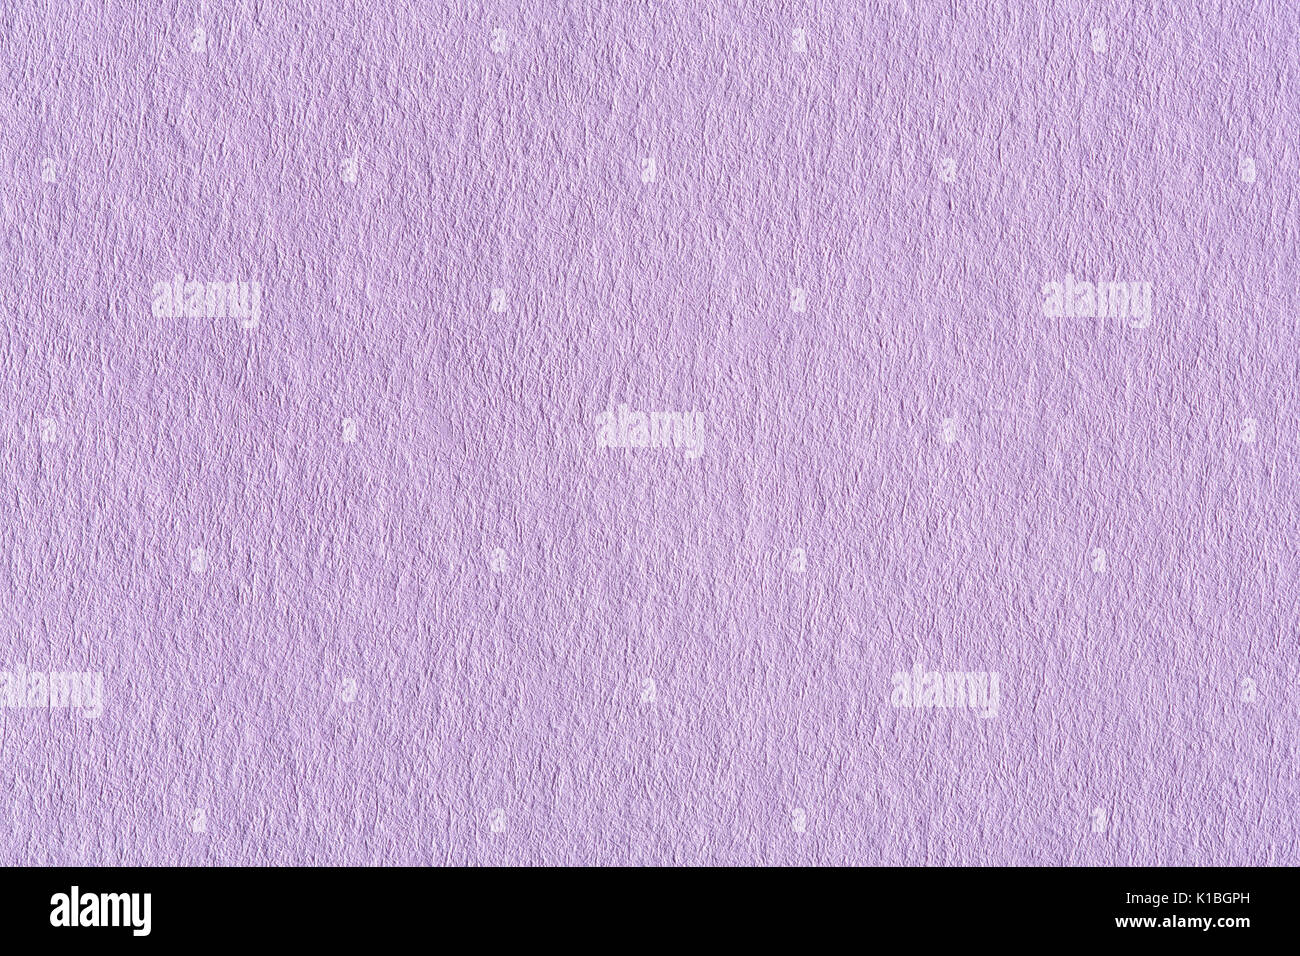 Light Purple Paper Texture Background Stock Photo, Picture and Royalty Free  Image. Image 104920327.